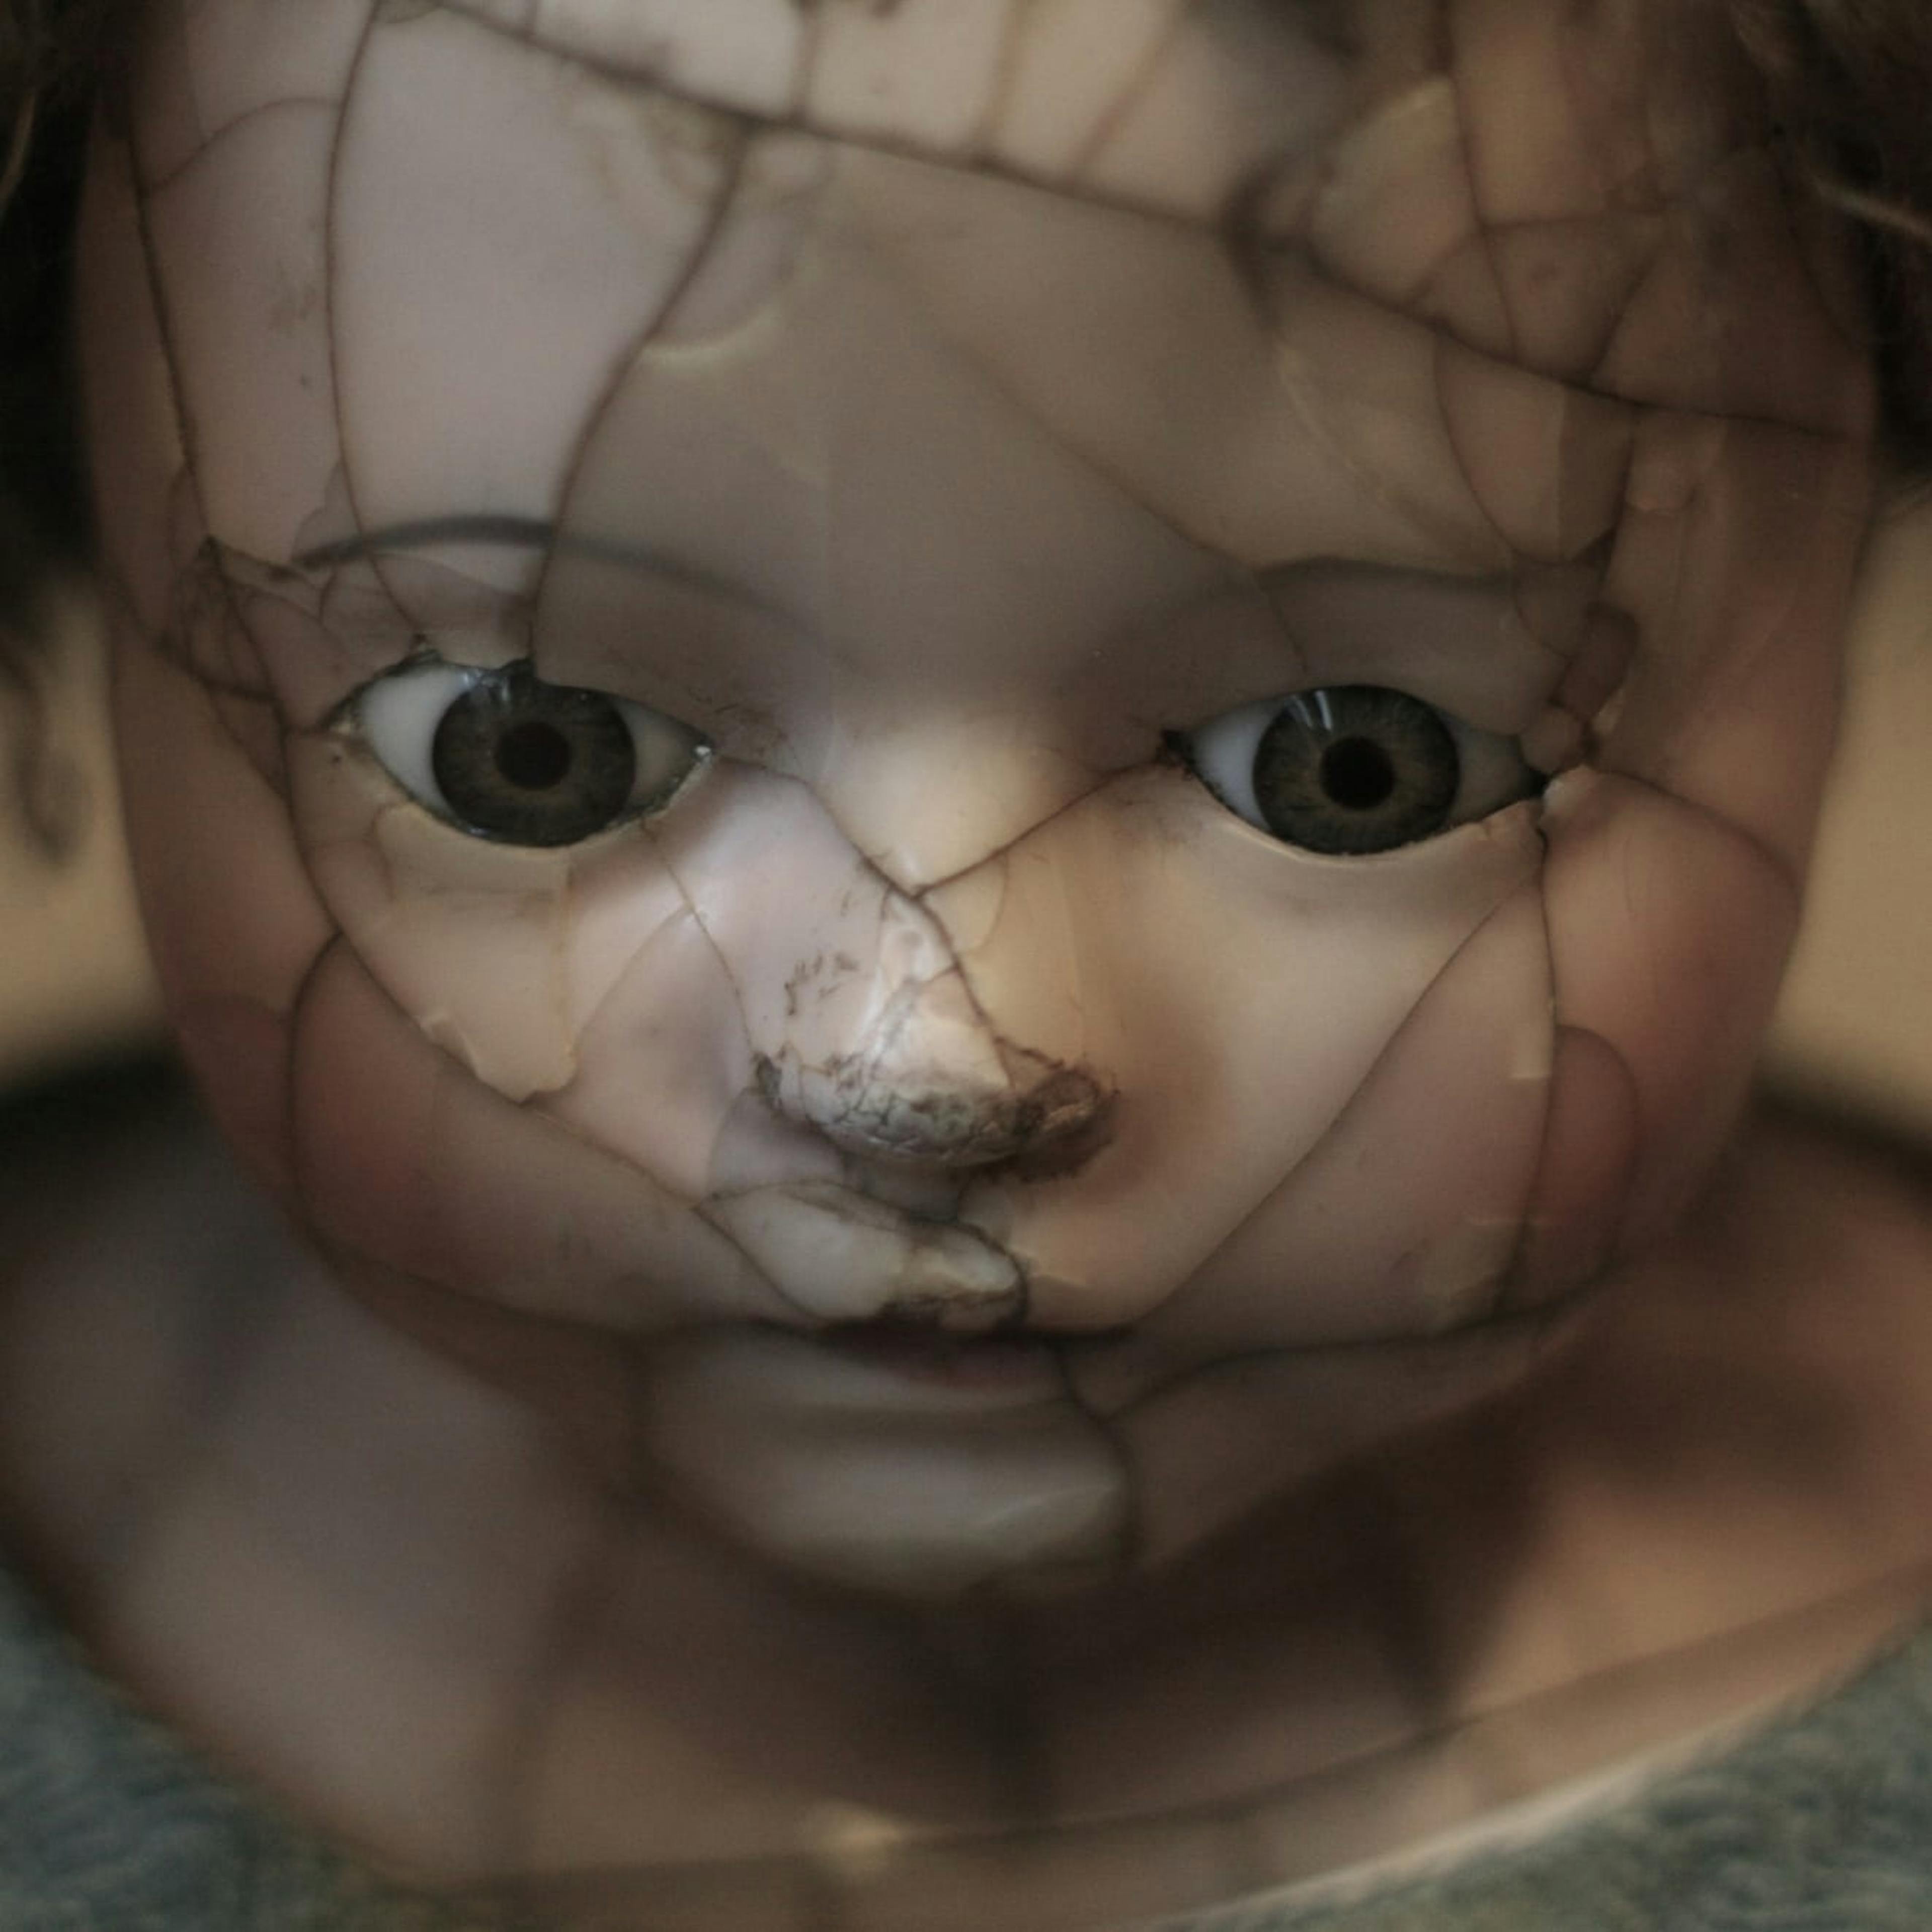 A cracked porcelain doll from a Romanian orphanage.